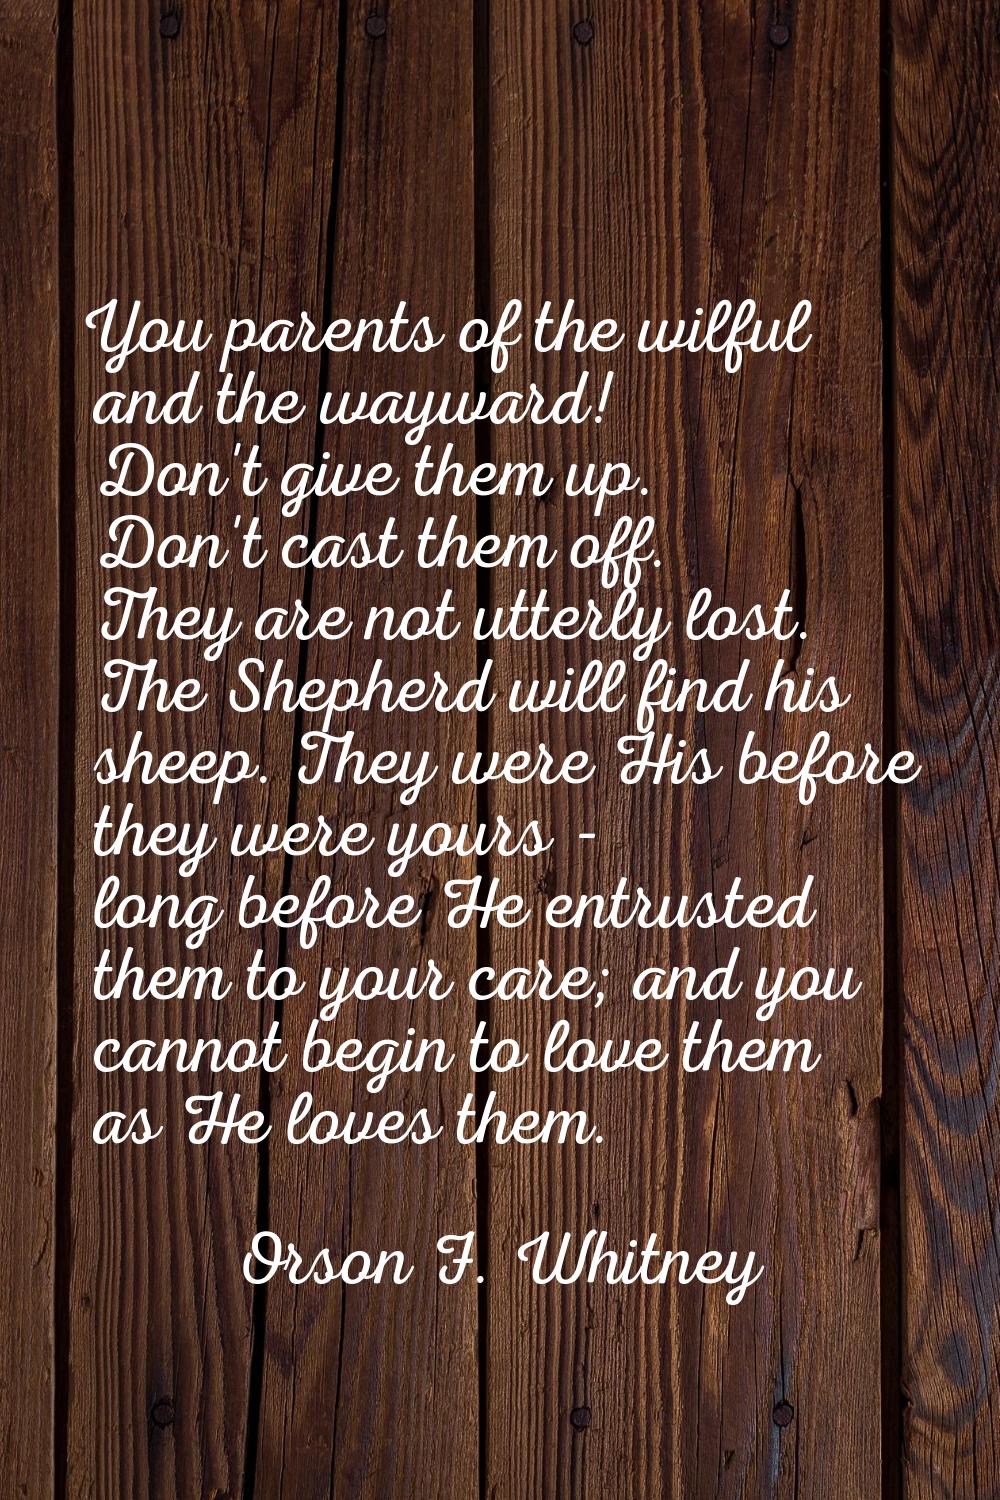 You parents of the wilful and the wayward! Don't give them up. Don't cast them off. They are not ut